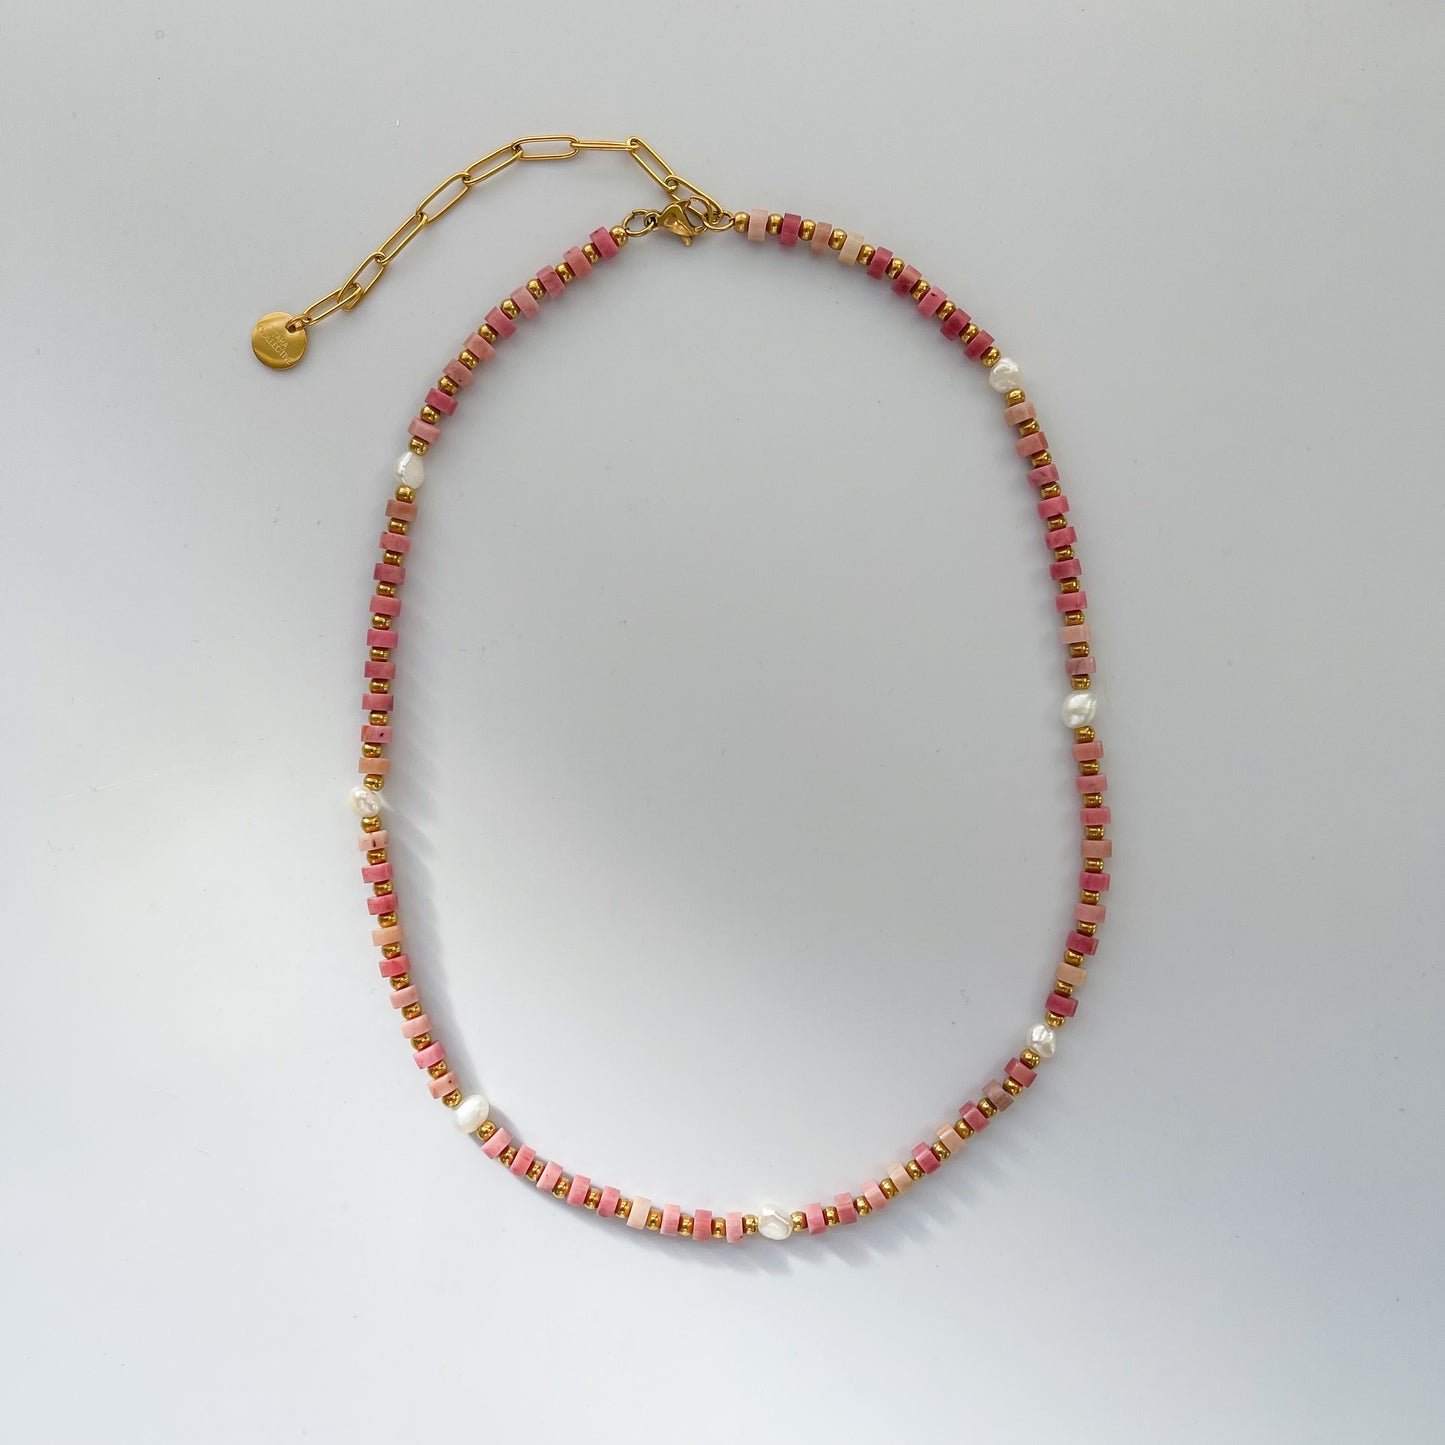 Rhodonite Heishi Necklace With Freshwater Pearls